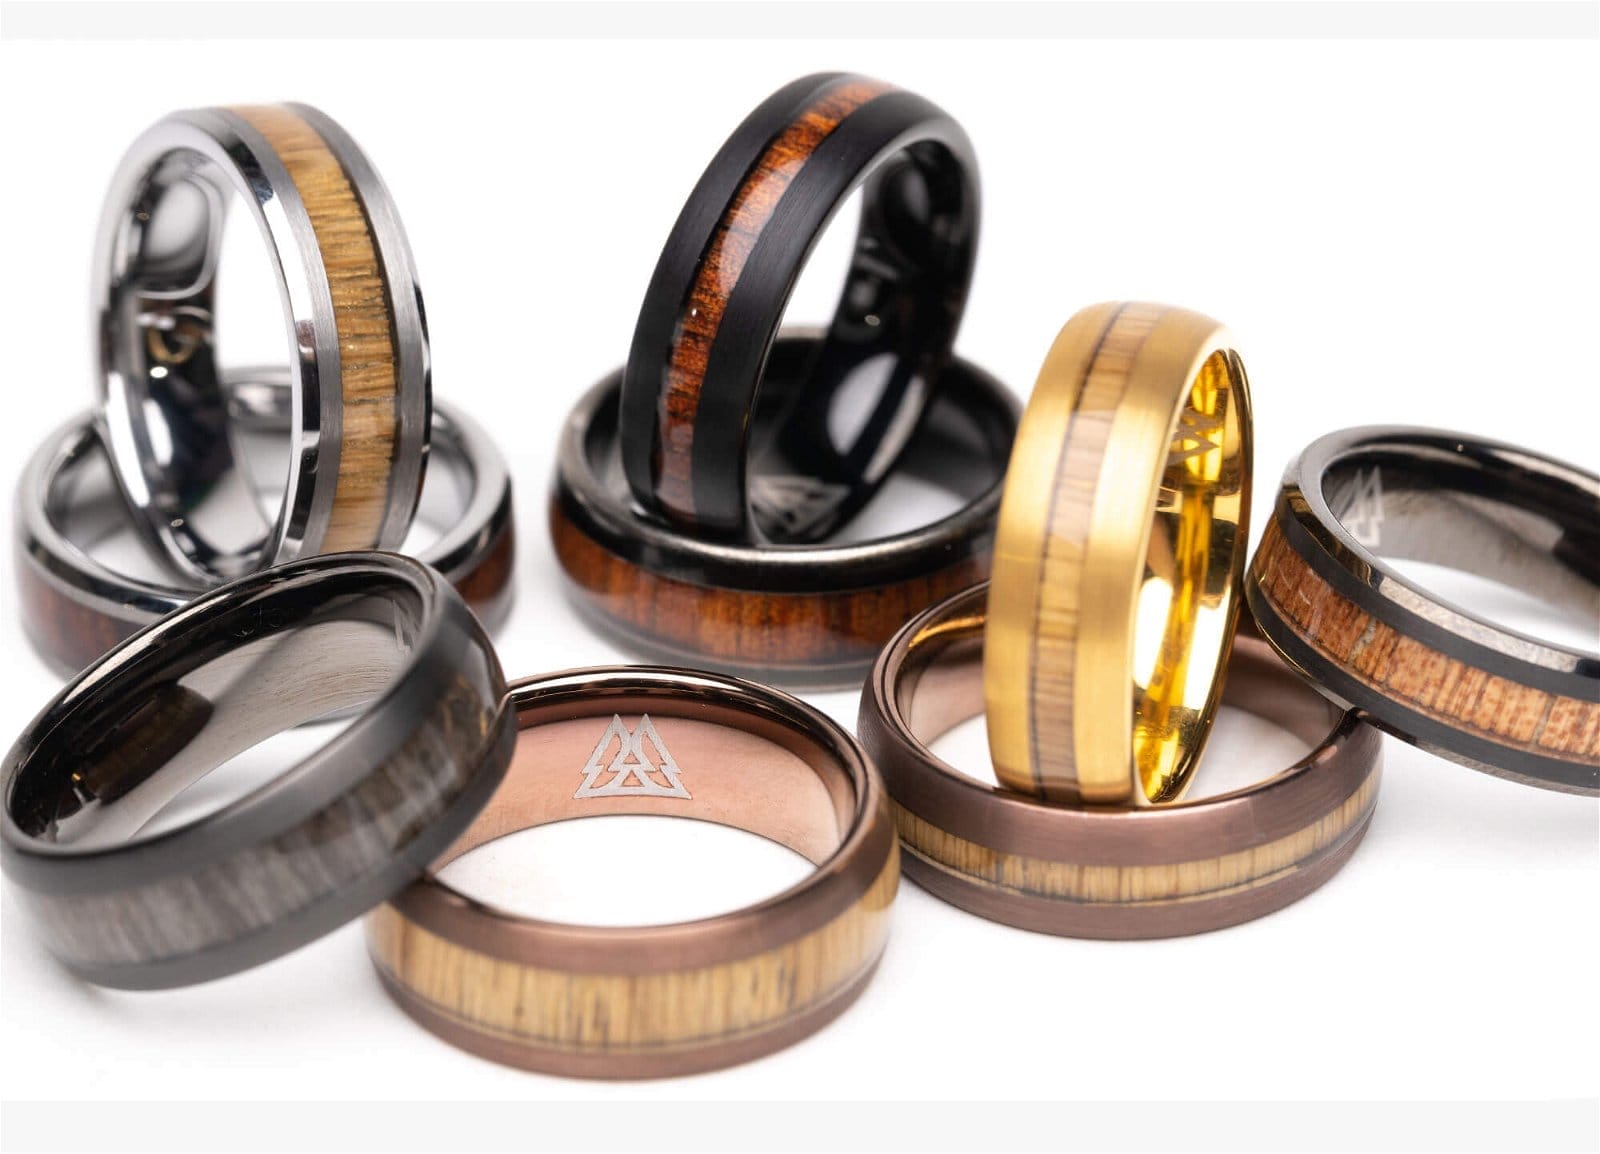 Original Gain Wedding Rings made with reclaimed materials